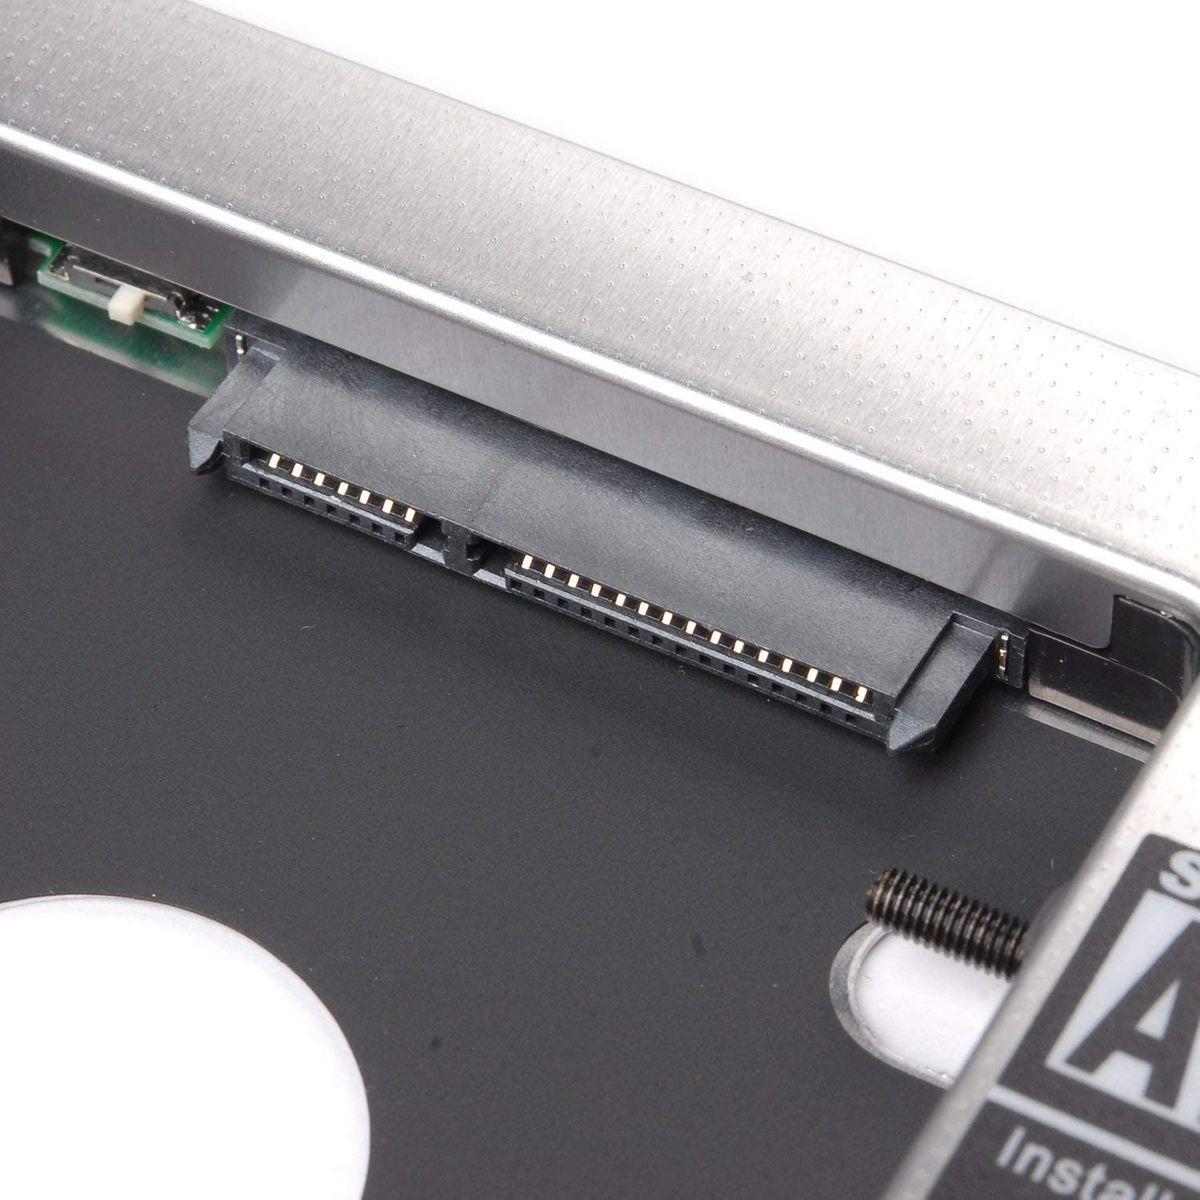 tinxi 2nd HDD Caddy 2nd HDD / SSD Bay Caddy SATA to SATA mounting frame Caddy Tray 9 5 mm for MacBook Pro 13 15 17